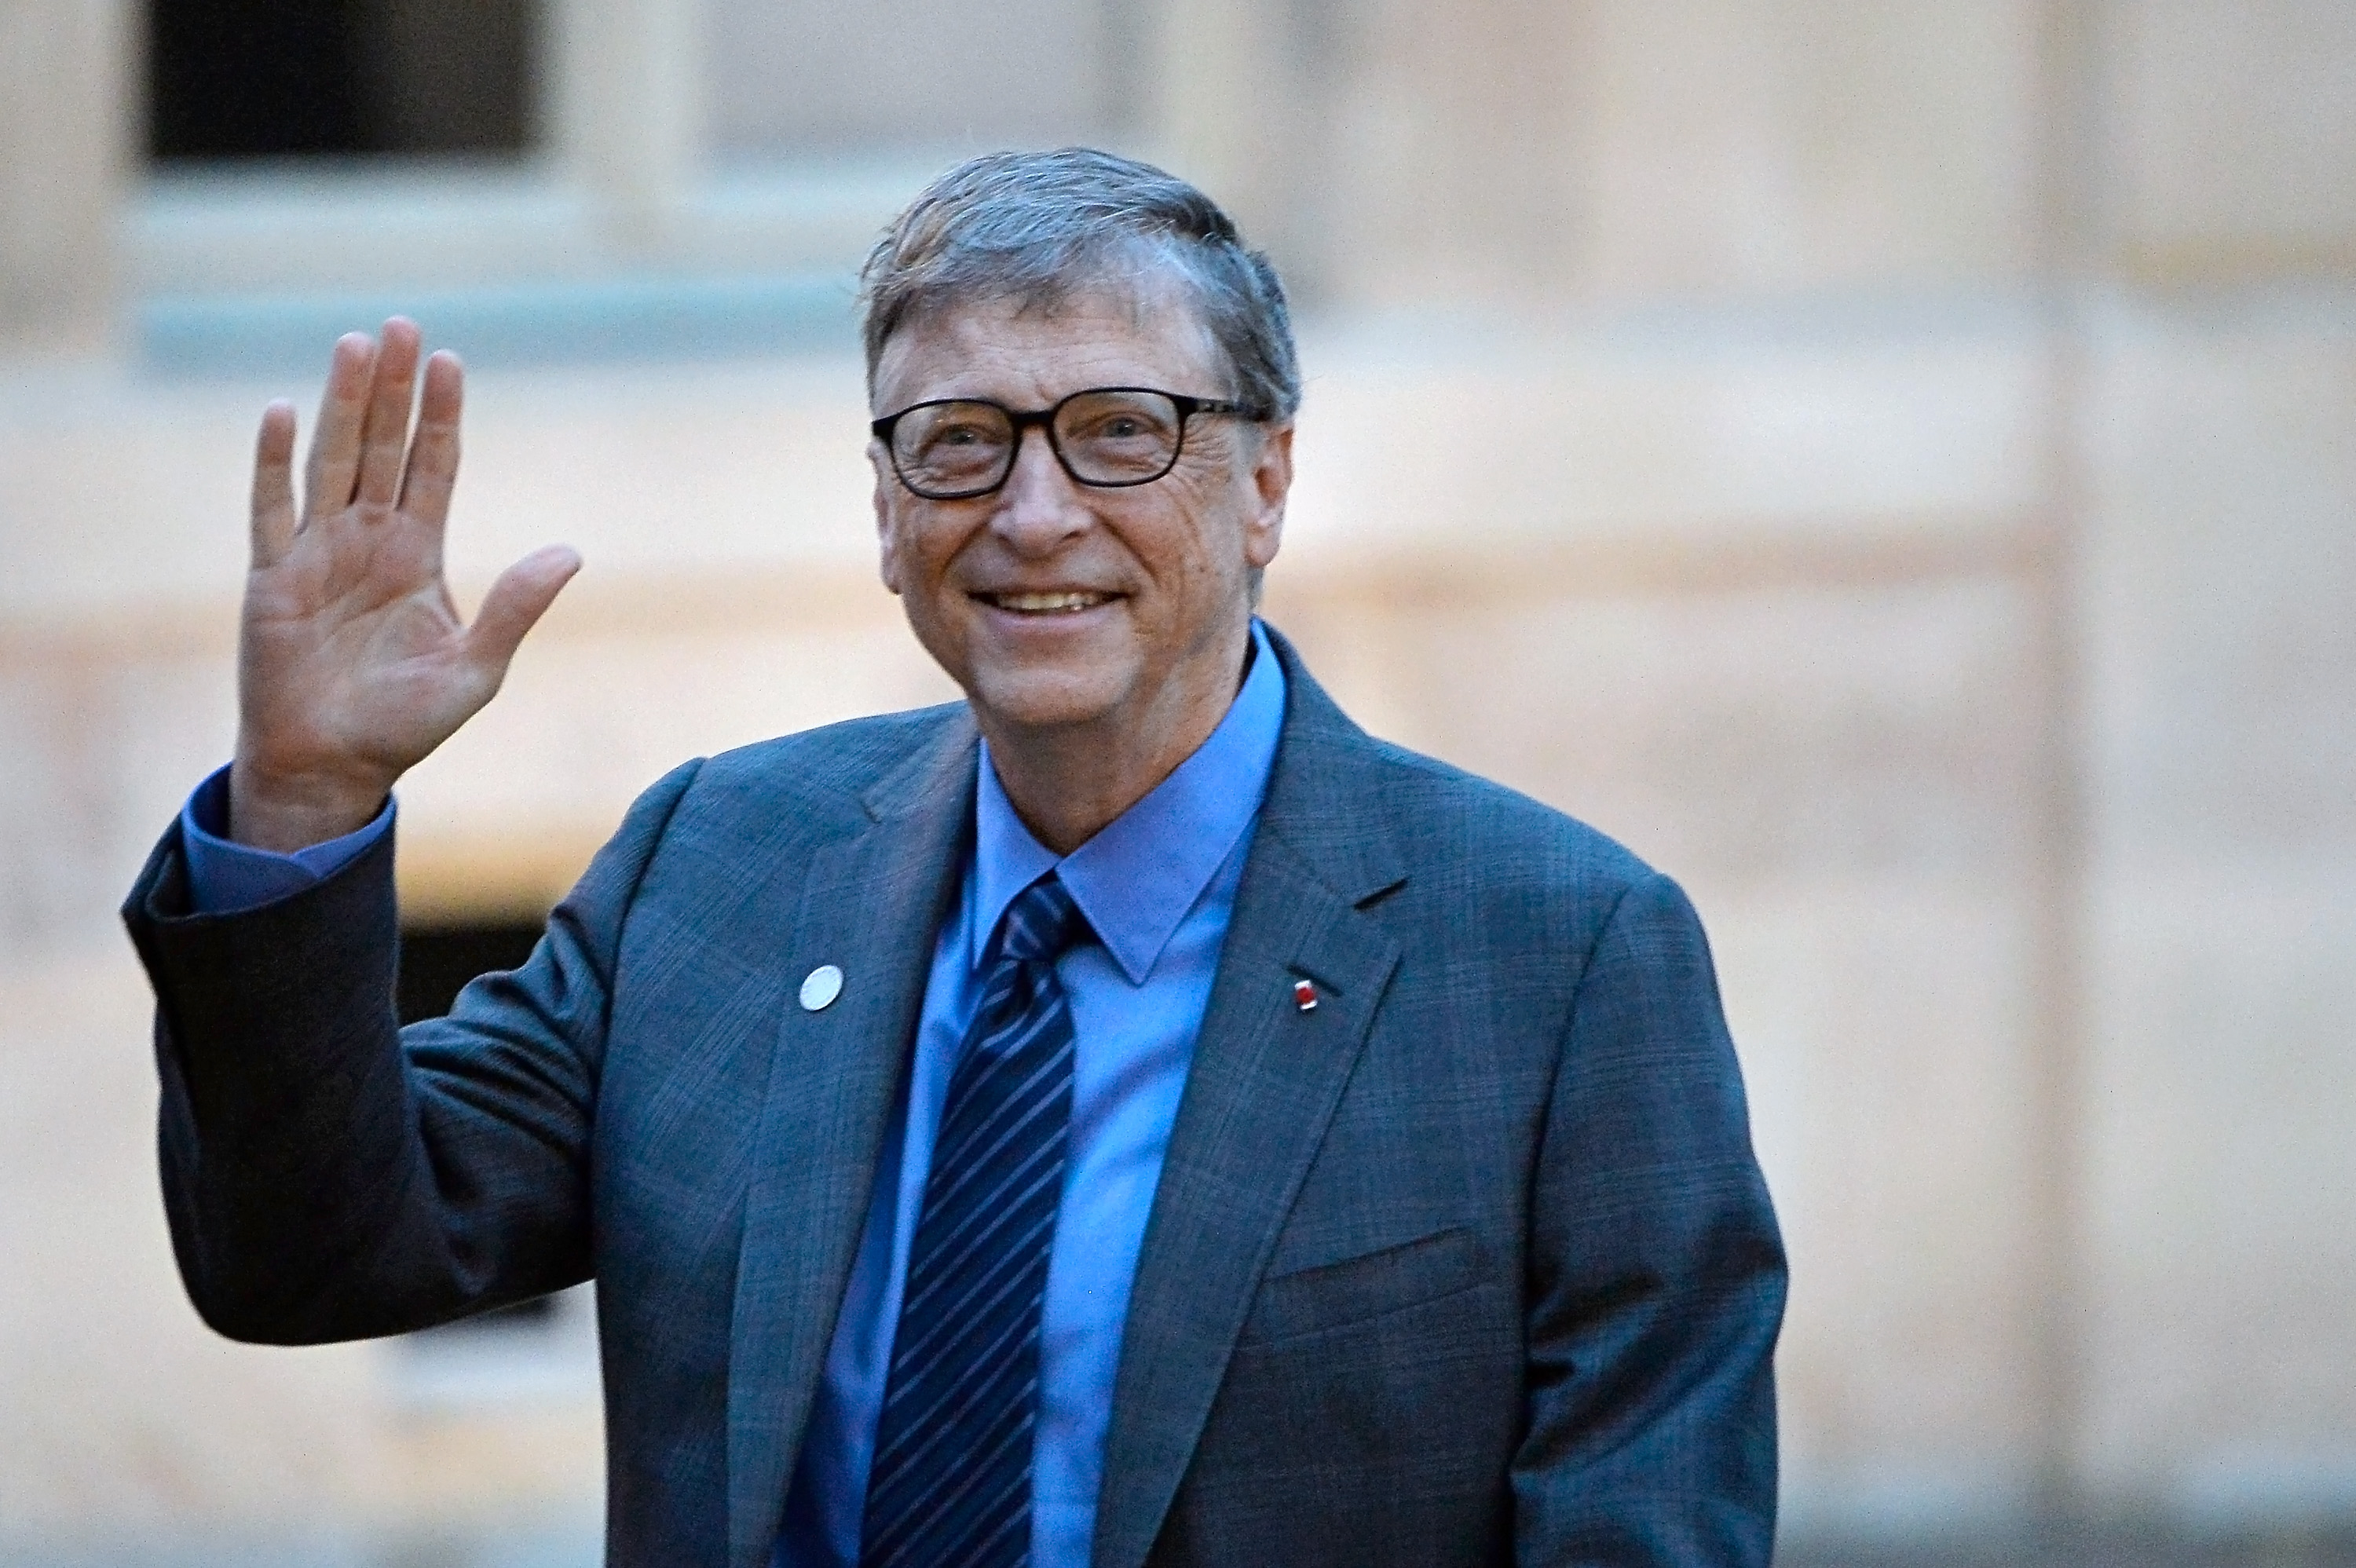 Bill Gates arrives for a meeting with French President Emmanuel Macron as he receives One Planet Summit's international philanthropists at Elysee Palace on December 12, 2017 in Paris, France. (Aurelien Meunier&mdash;Getty Images)